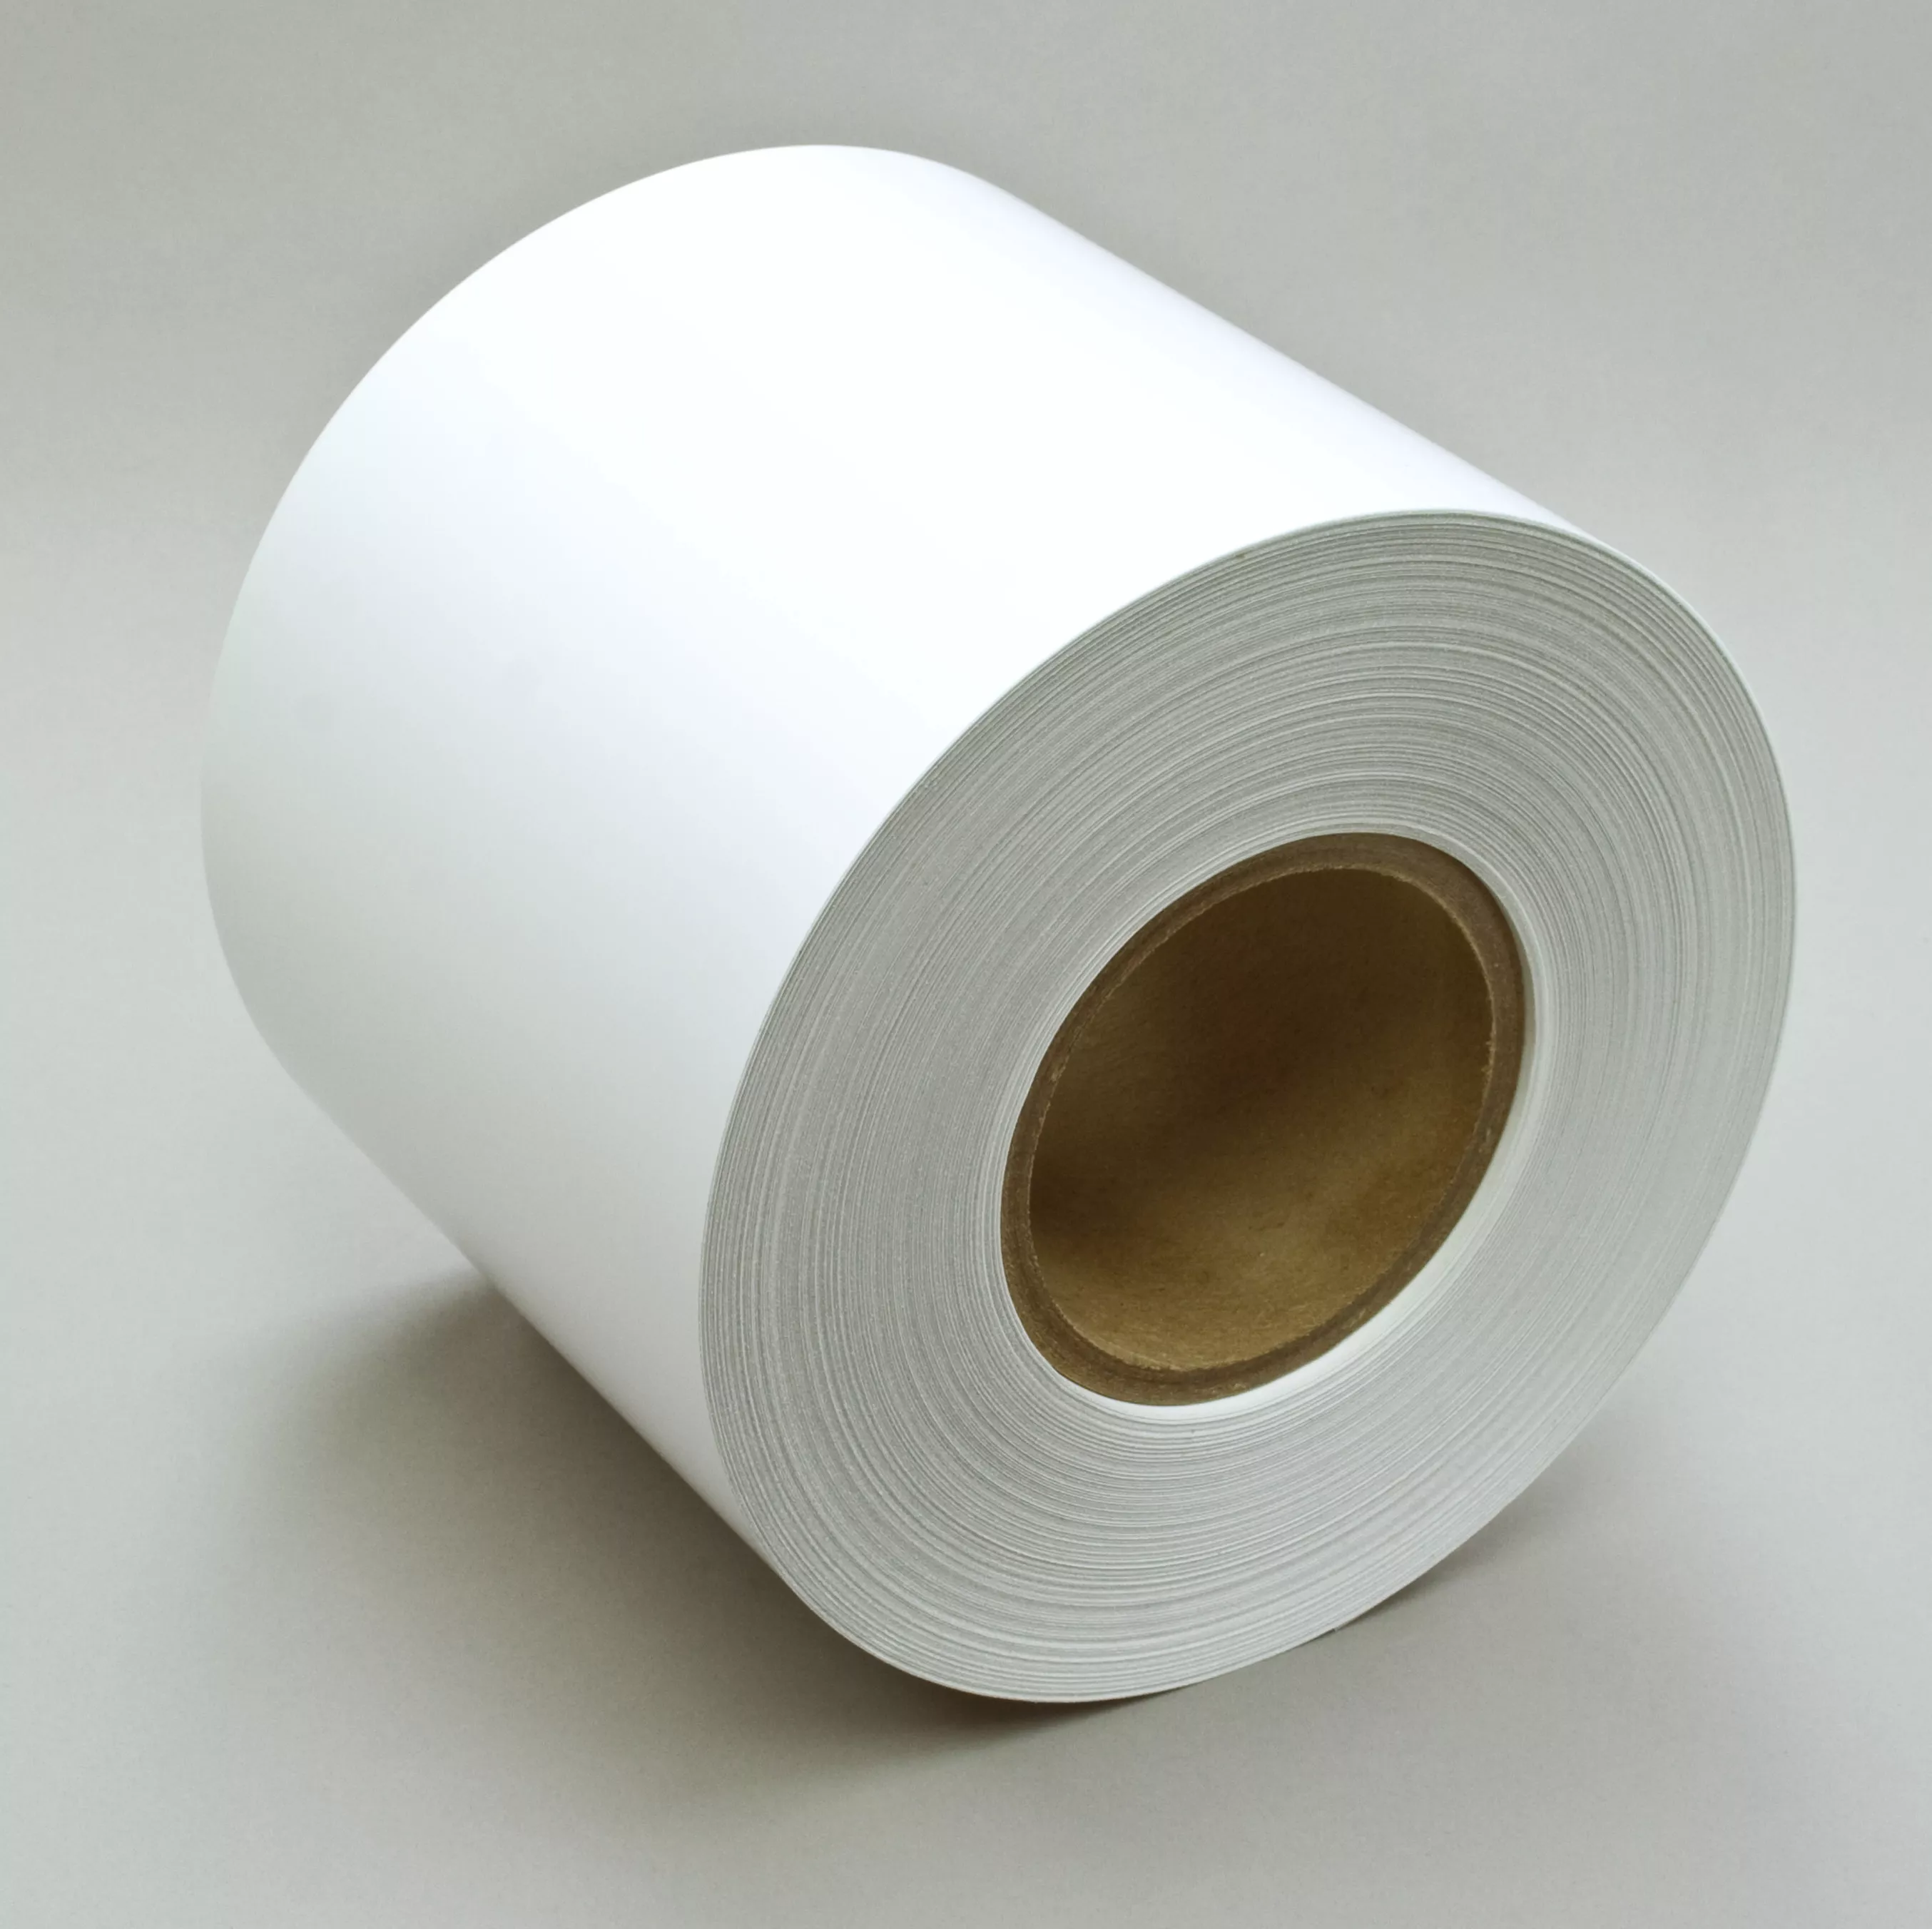 3M™ Thermal Transfer Label Material 7813, Silver Polyester Matte, 6 in x
1668 ft, 1 Roll/Case